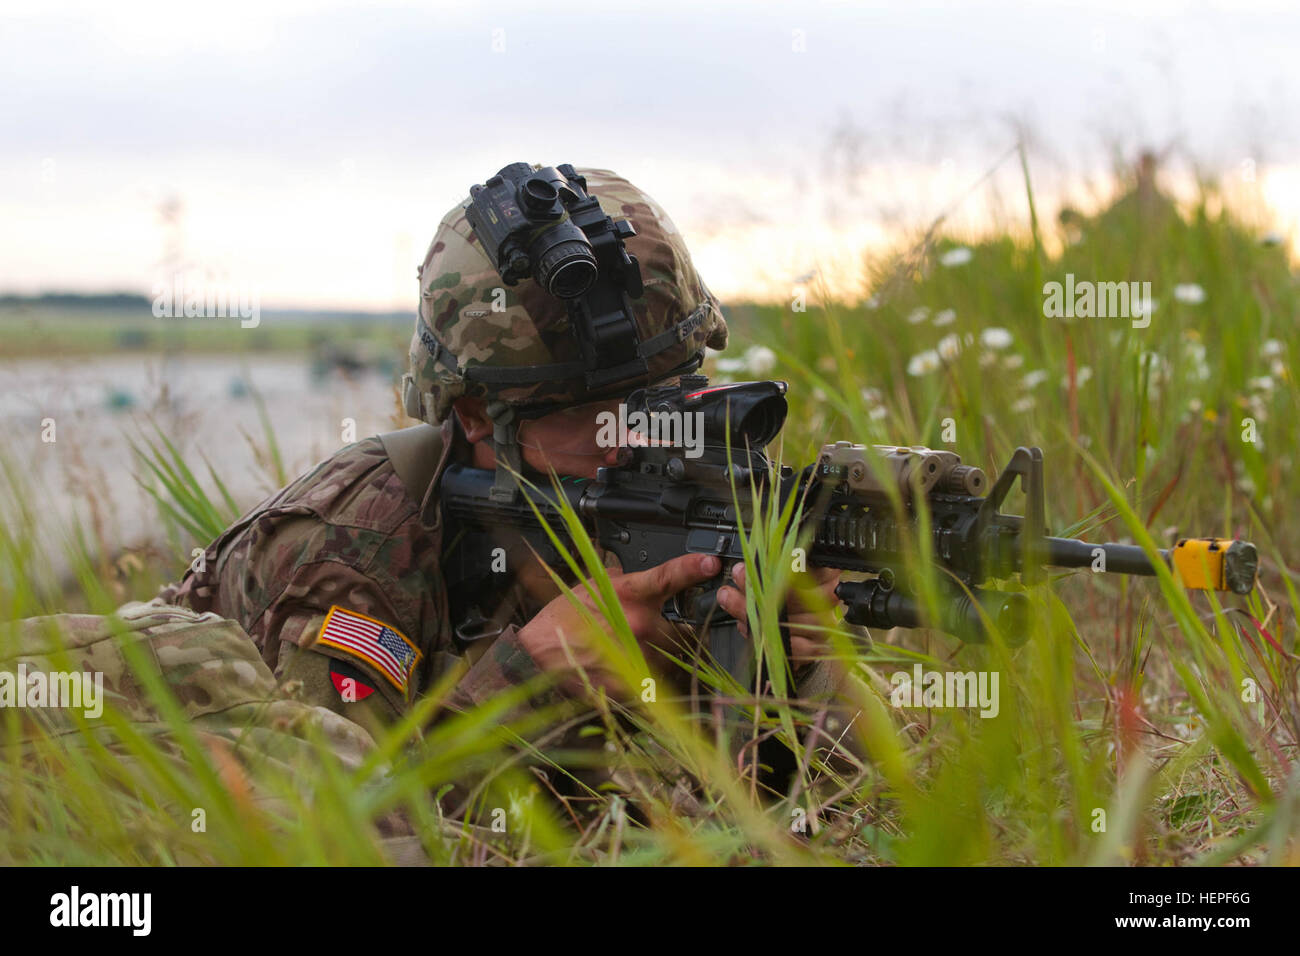 Pvt. Michael Simpkins, an infantryman with 1st Battalion, 503rd Infantry Regiment, 173rd Airborne Brigade, maintains security June 16, 2015, at Swidwin Air Base in Poland during Exercise Saber Strike 15. Encompassing more than 6,000 participants from 13 different nations, Saber Strike is a long-standing U.S. Army Europe-led cooperative training exercise. Designed to improve joint operational capability in a range of missions as well as preparing the participating nations and units to support multinational contingency operations, this year's exercise takes place across Estonia, Latvia, Lithuani Stock Photo